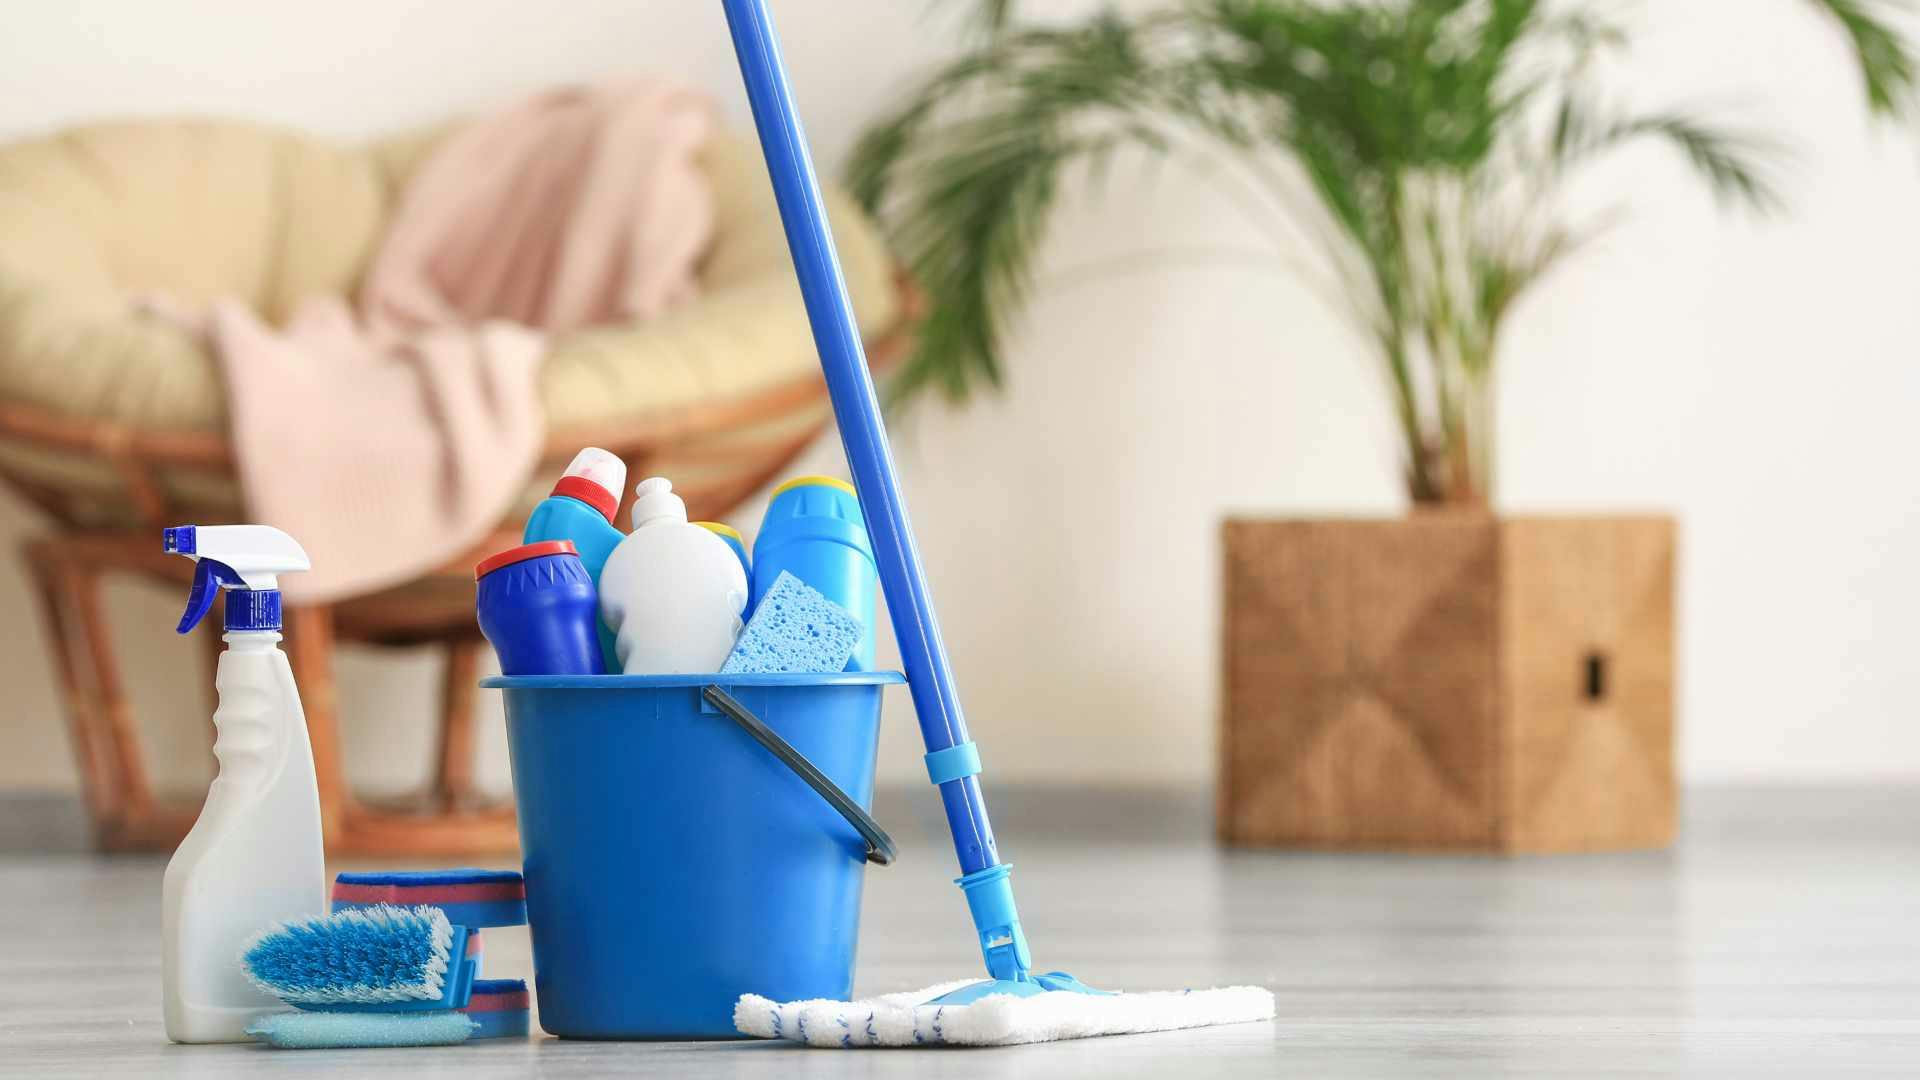 Mop next to bucket of cleaning supplies with a spray bottle and sponge to the right of the bucket